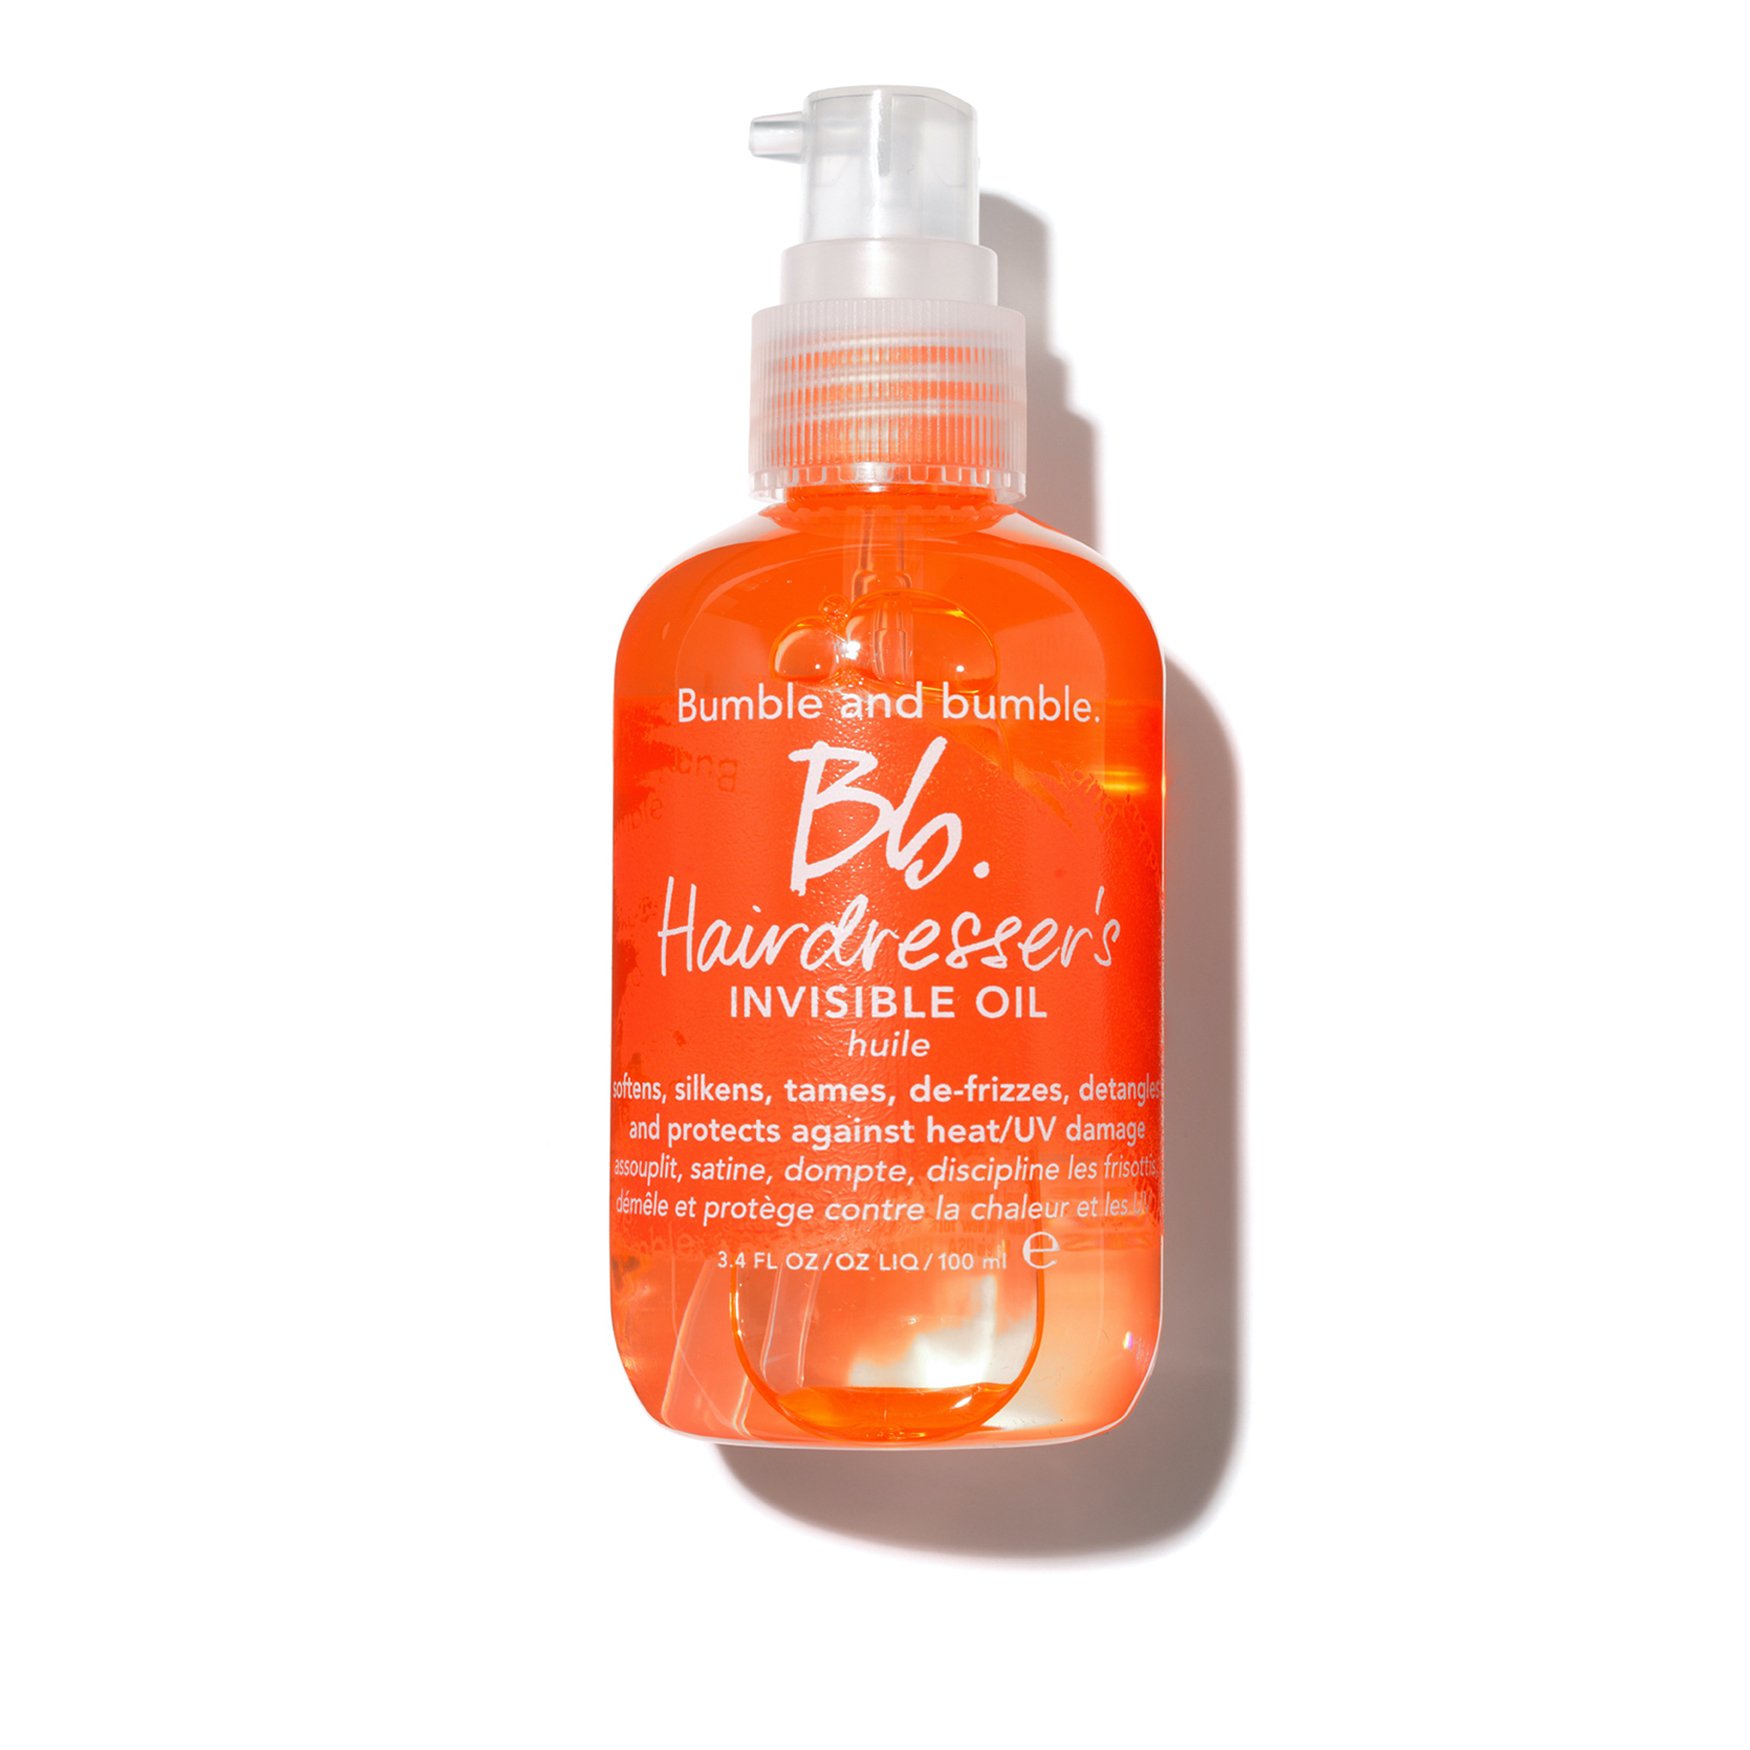 Bumble and bumble Hairdresser's Invisible Oil, €45 